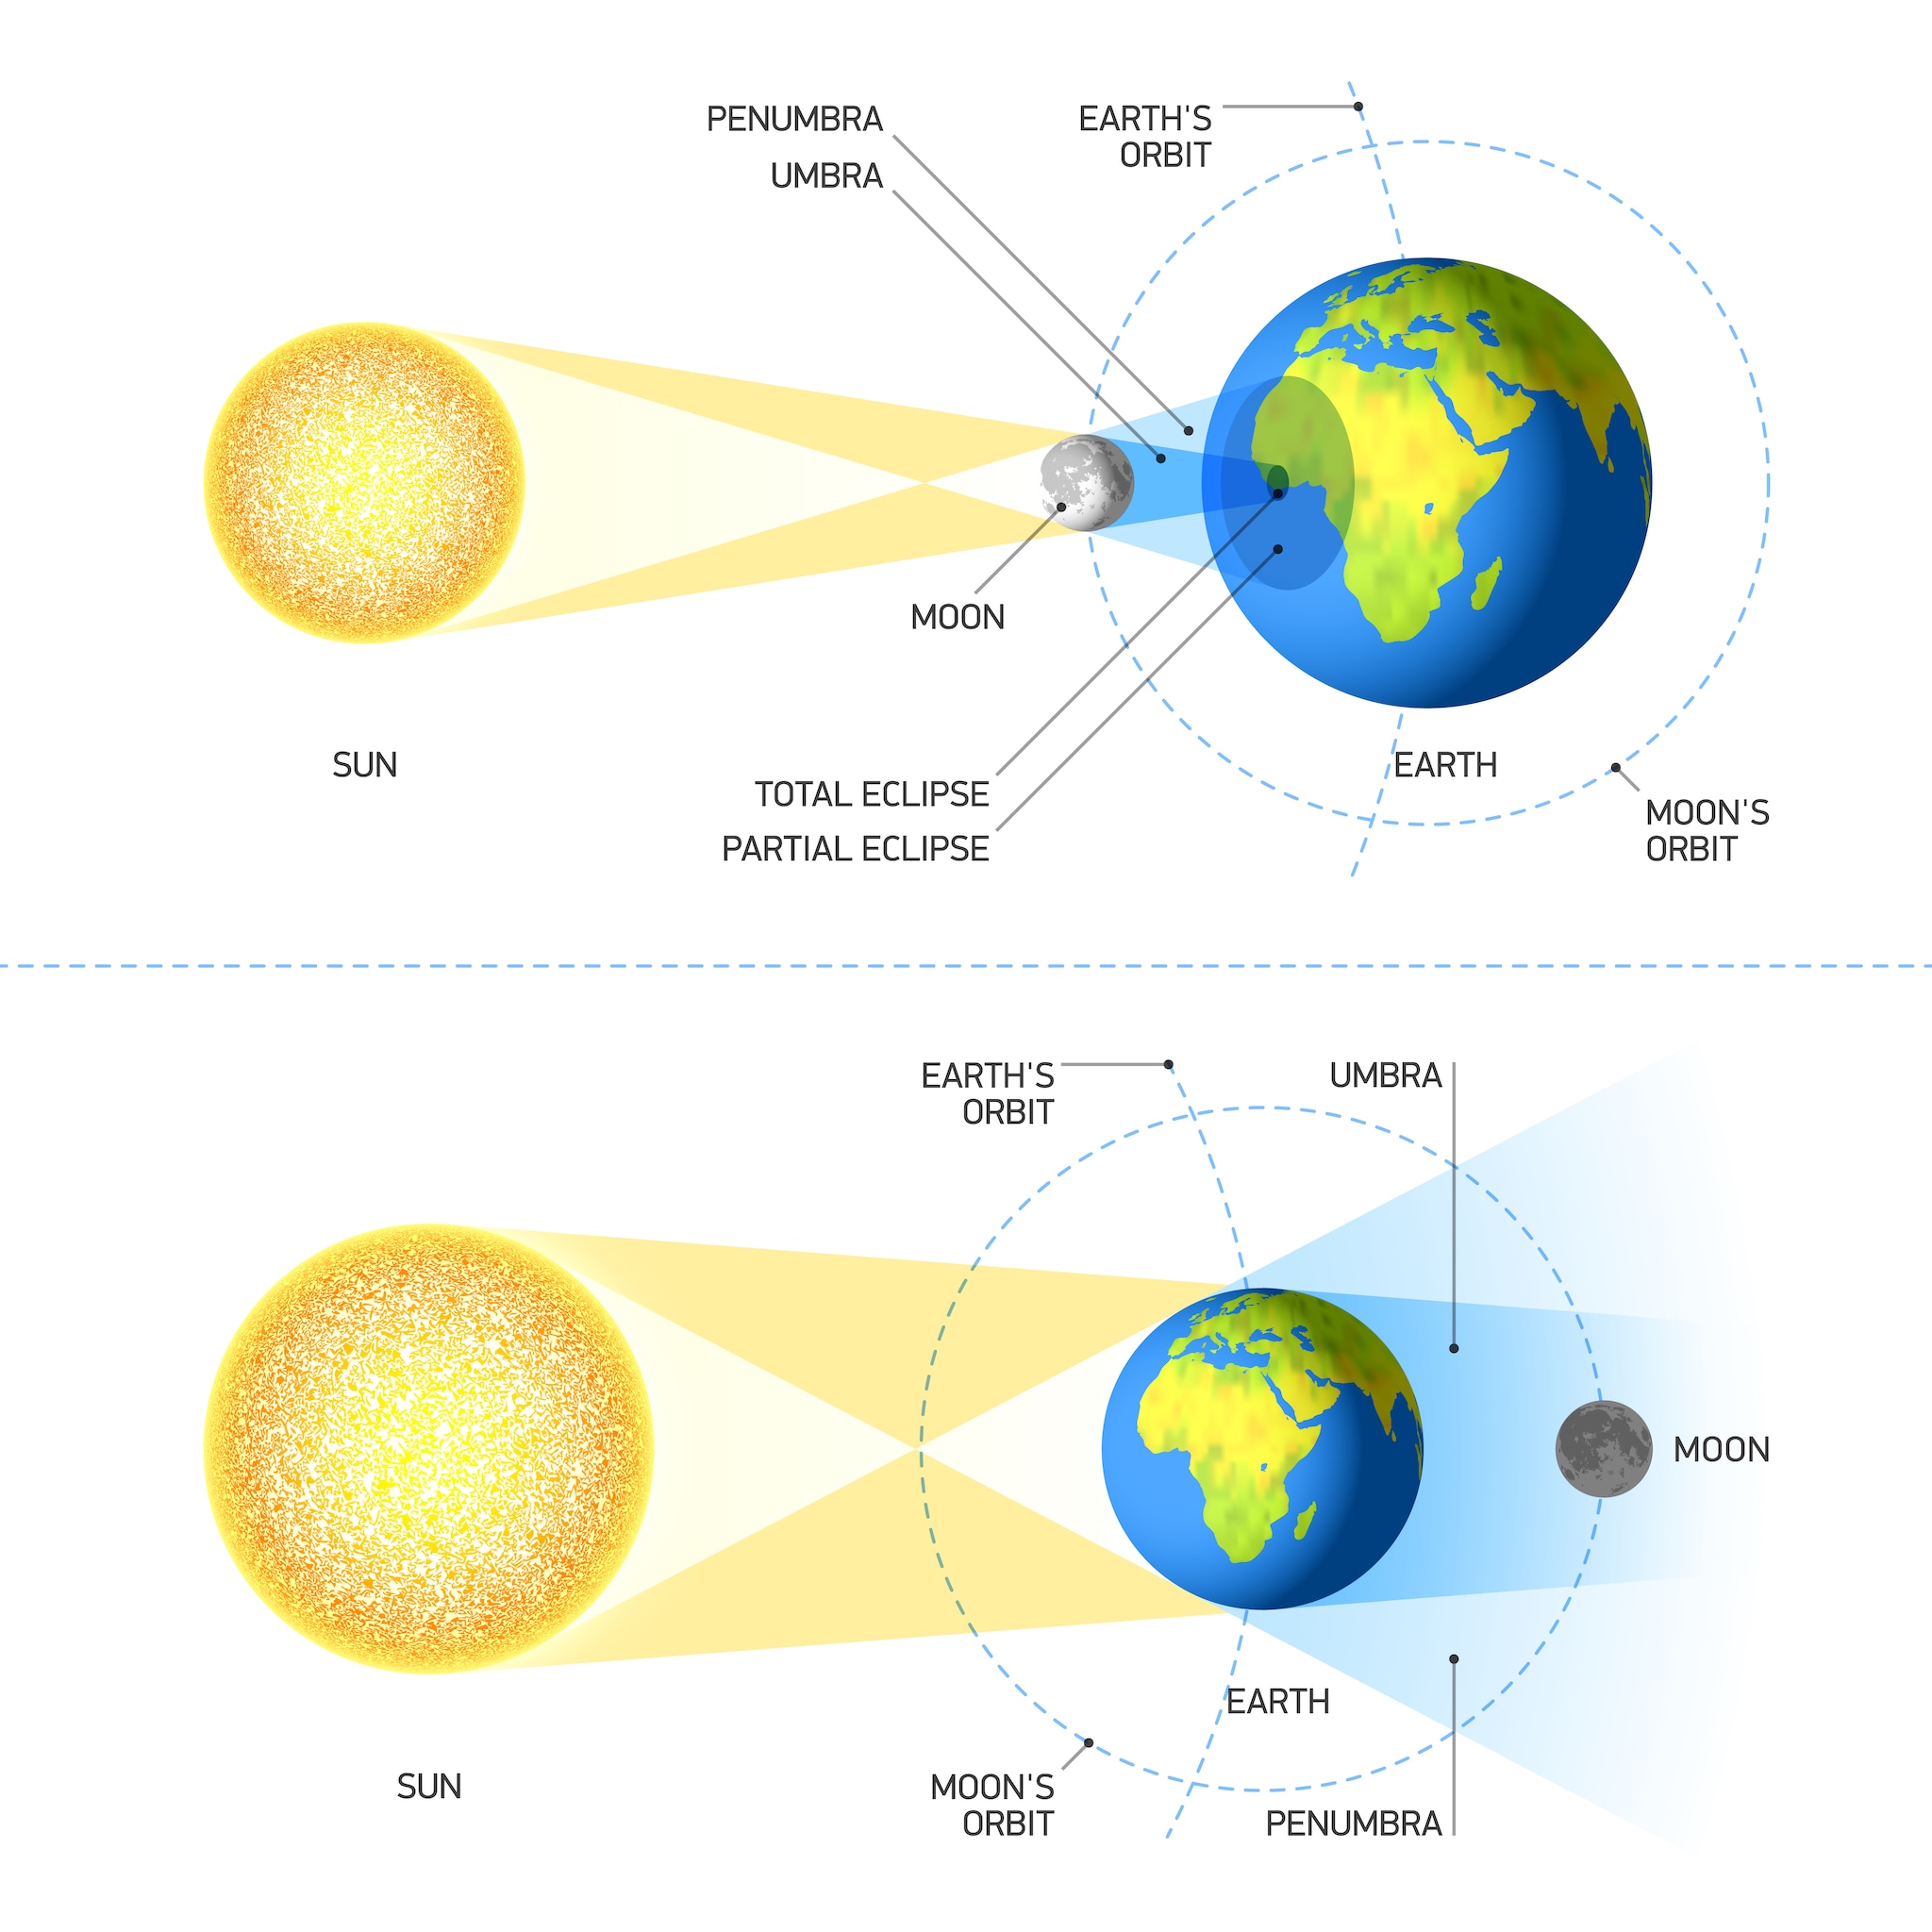 Discover The Frequency Of Solar Eclipses: How Often Do They Occur?